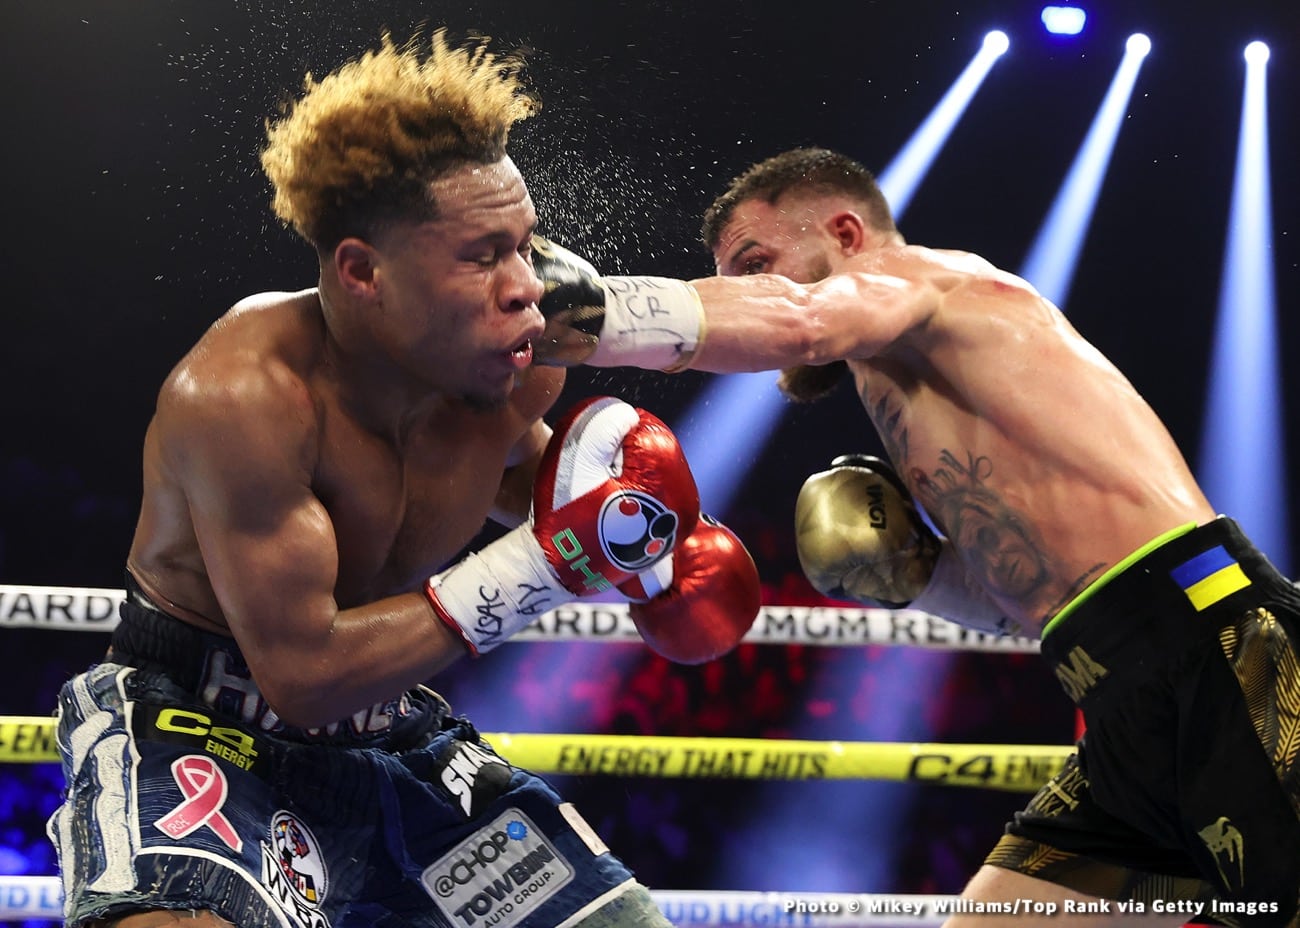 Devin Haney beats Lomachenko by close decision - Boxing results